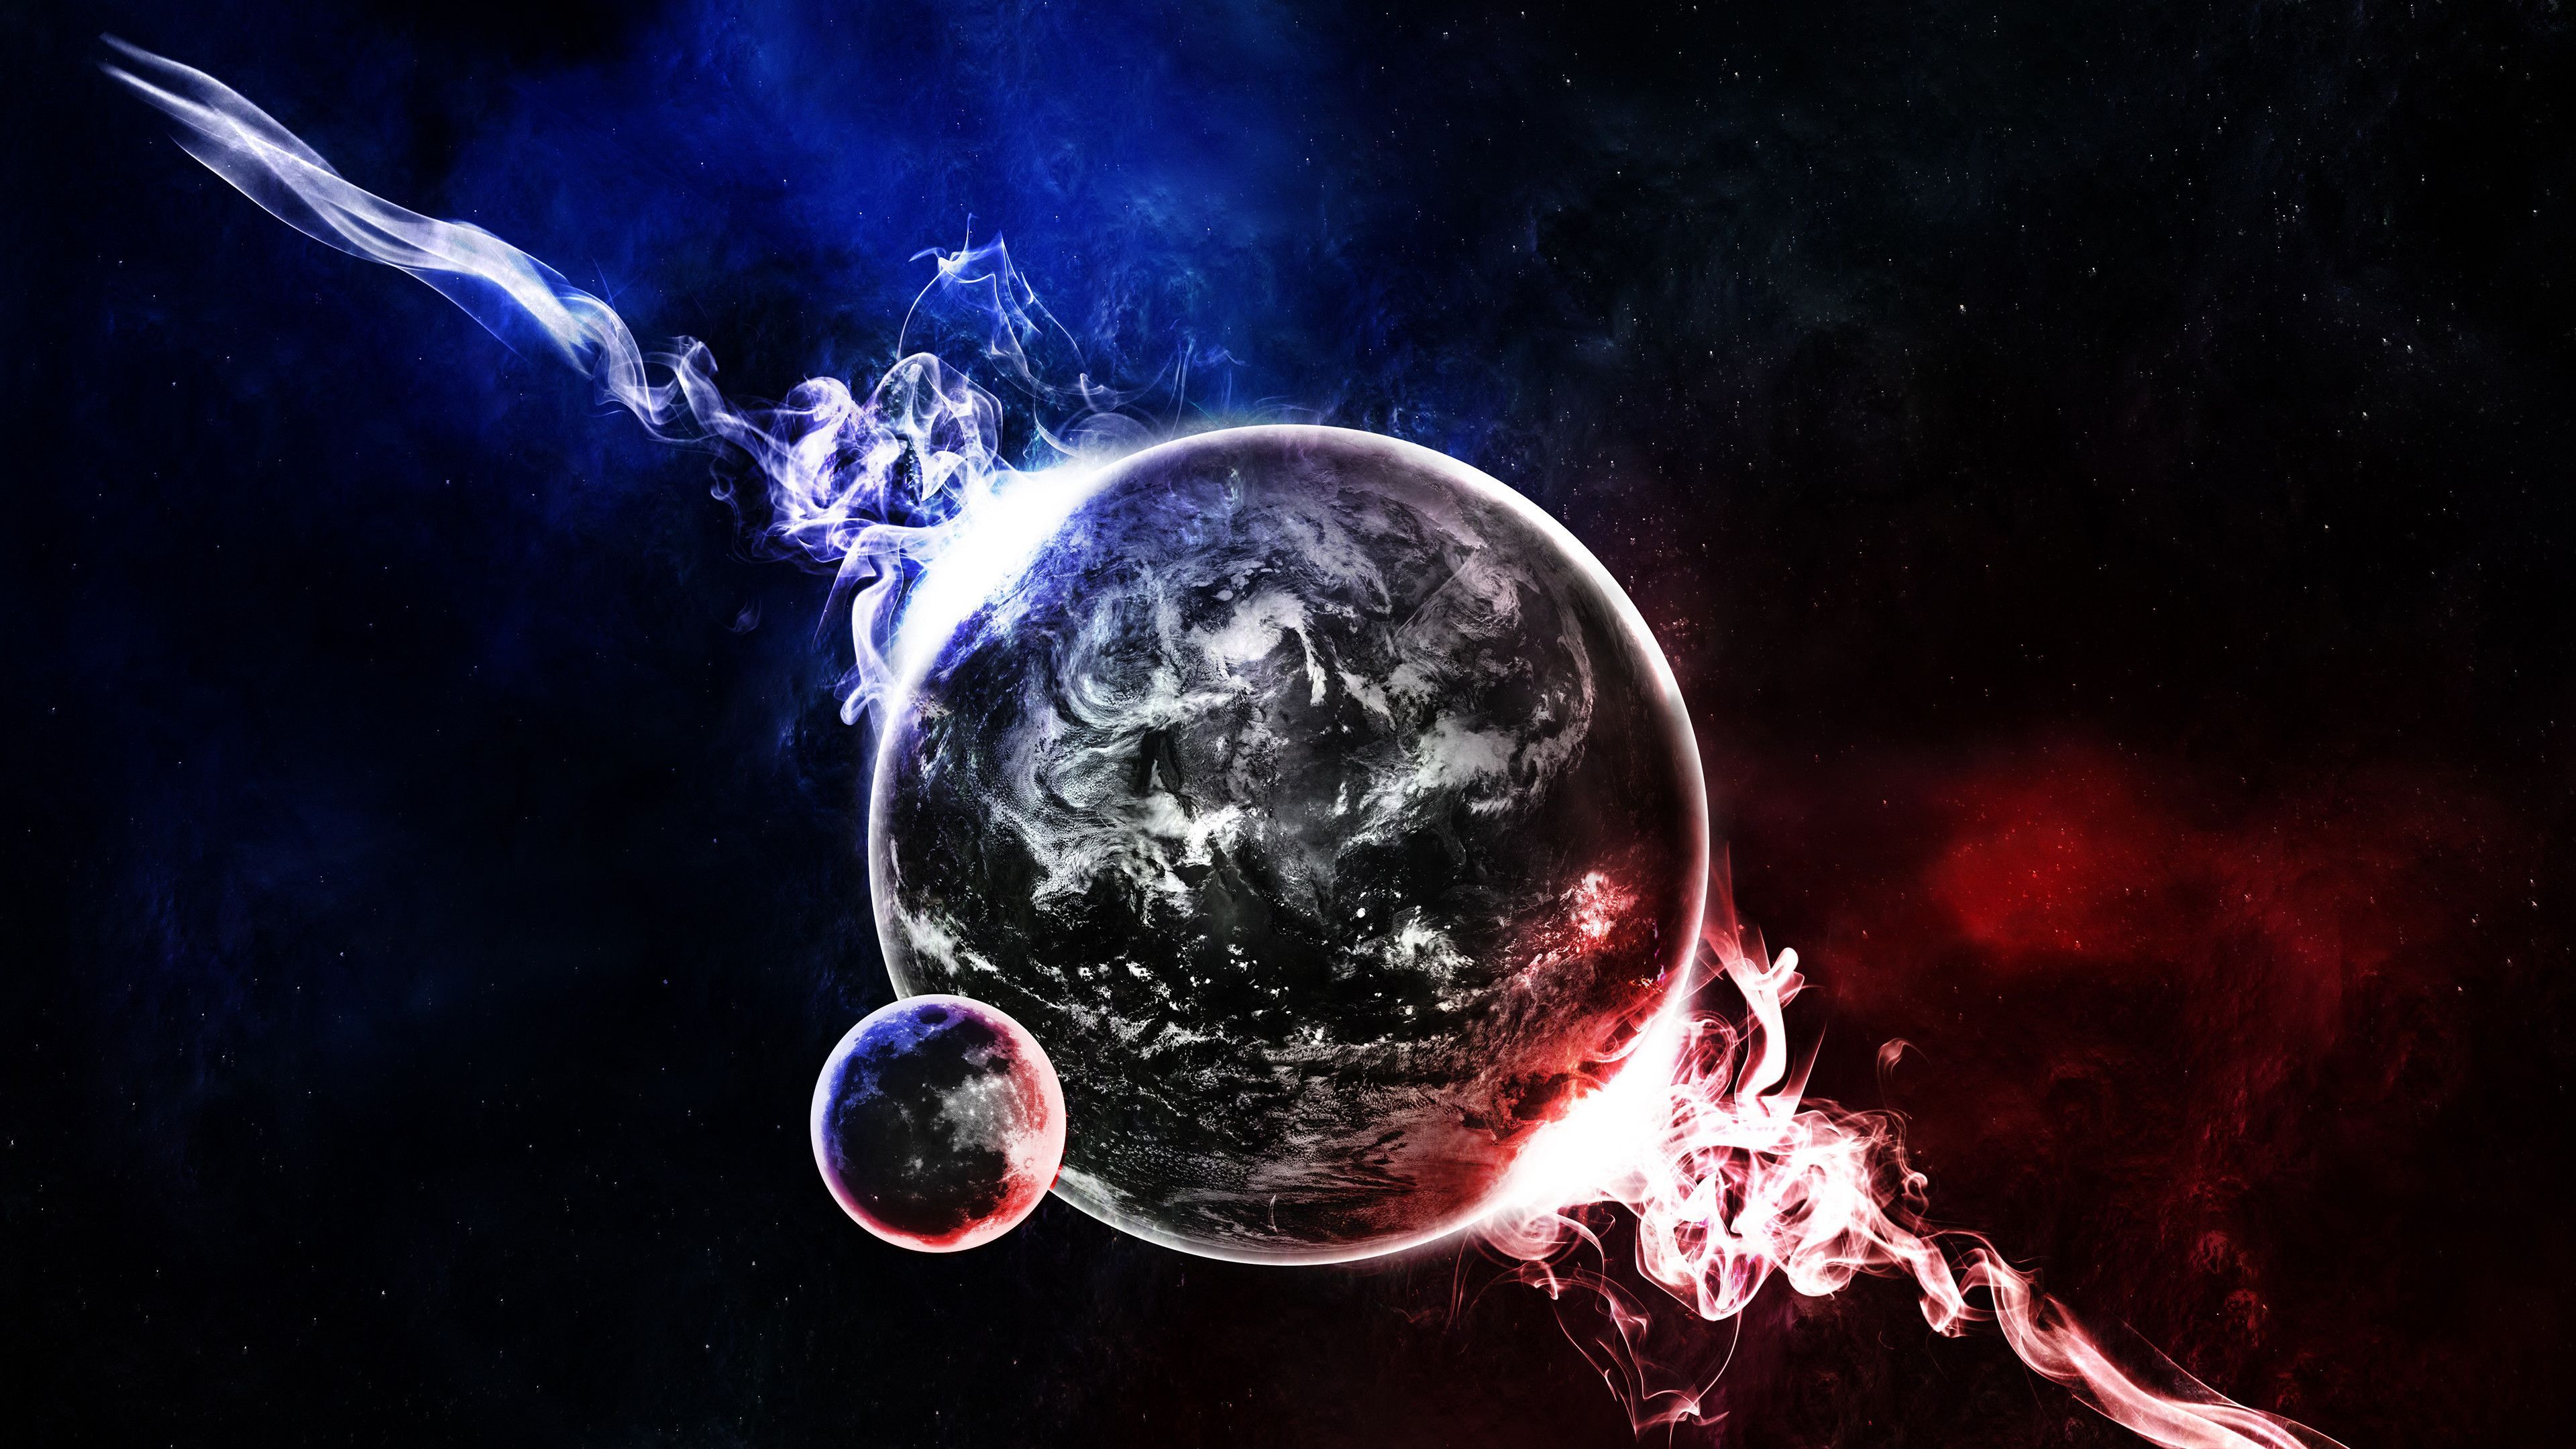 Cool Wallpaper Chromebook. mywallpaper site. Astral travel, Planets, Earth